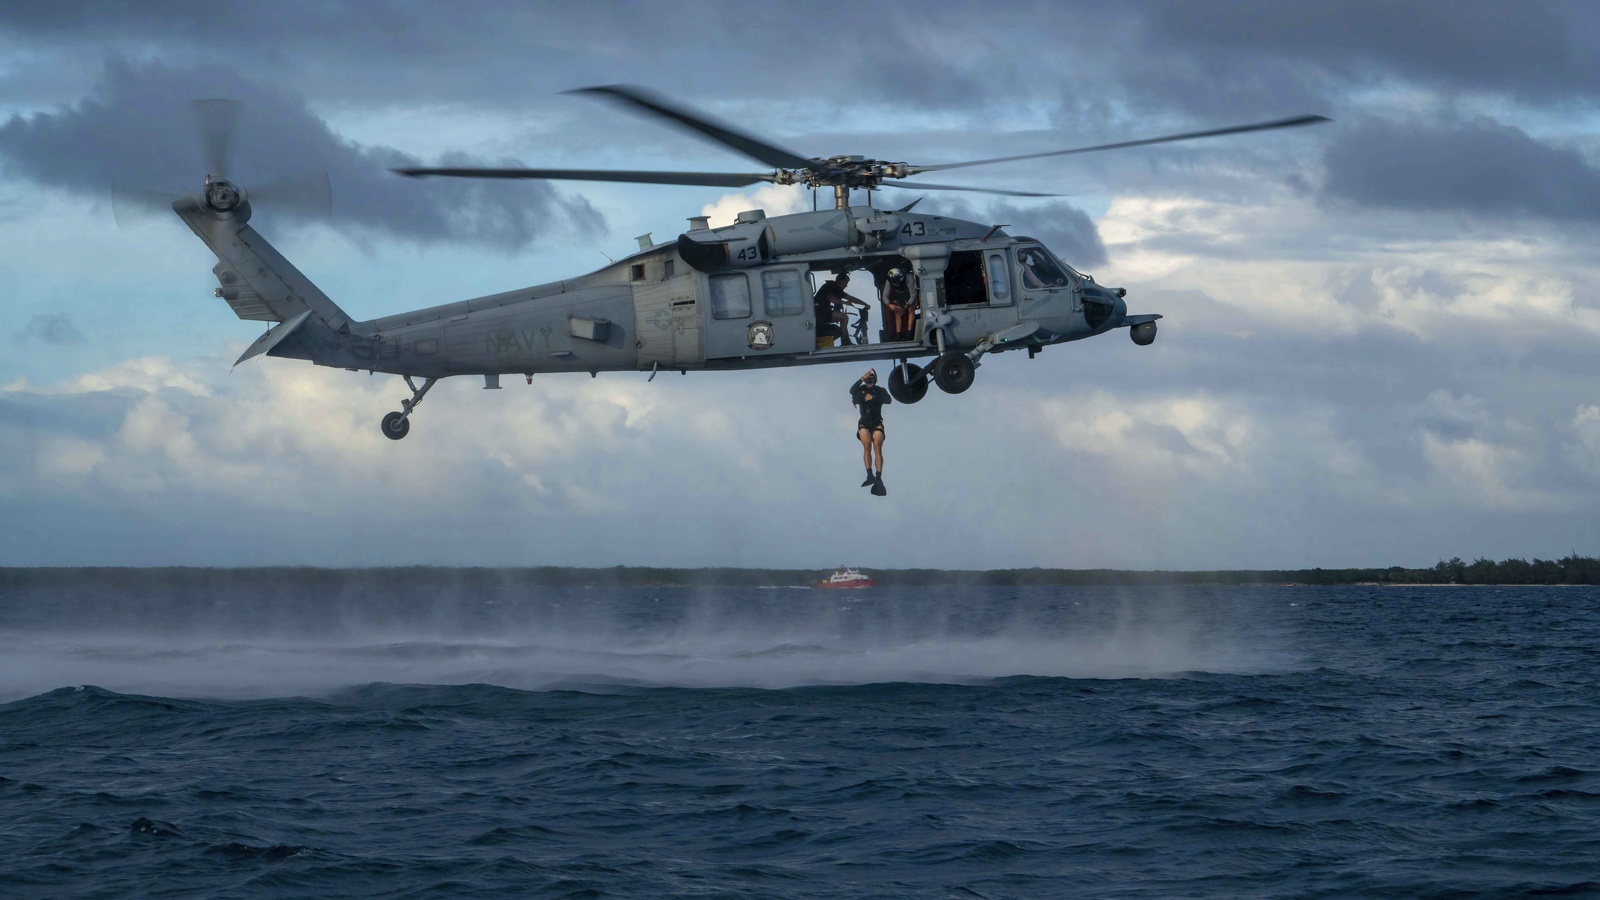 mh-60s seahawk, multi-mission helicopter, helicopter sea combat squadron, guam